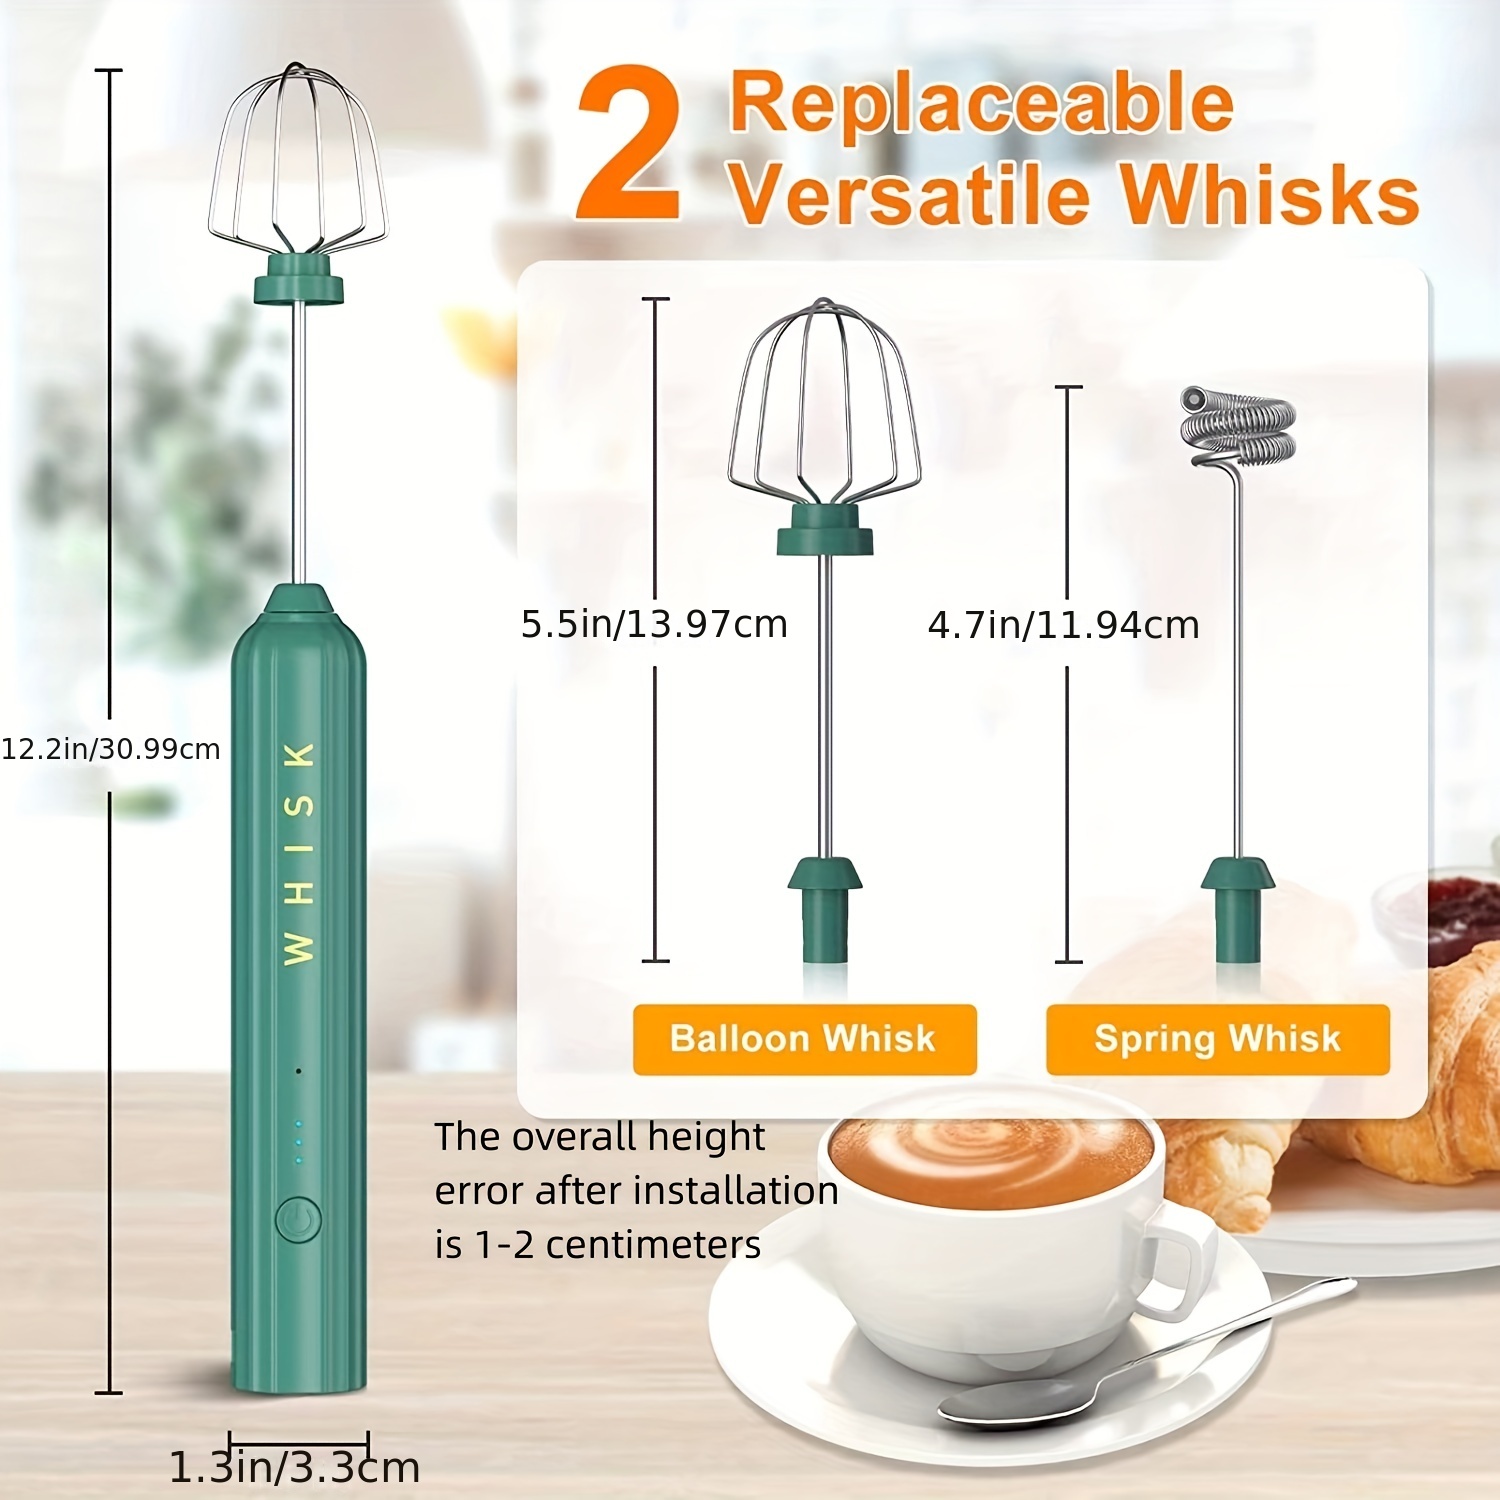 Handheld Milk Frother for Coffee with Stand, Red Battery Powered (Included)  Whisk Drink Mixer with 2 Stainless Steel Whisk Heads for Latte